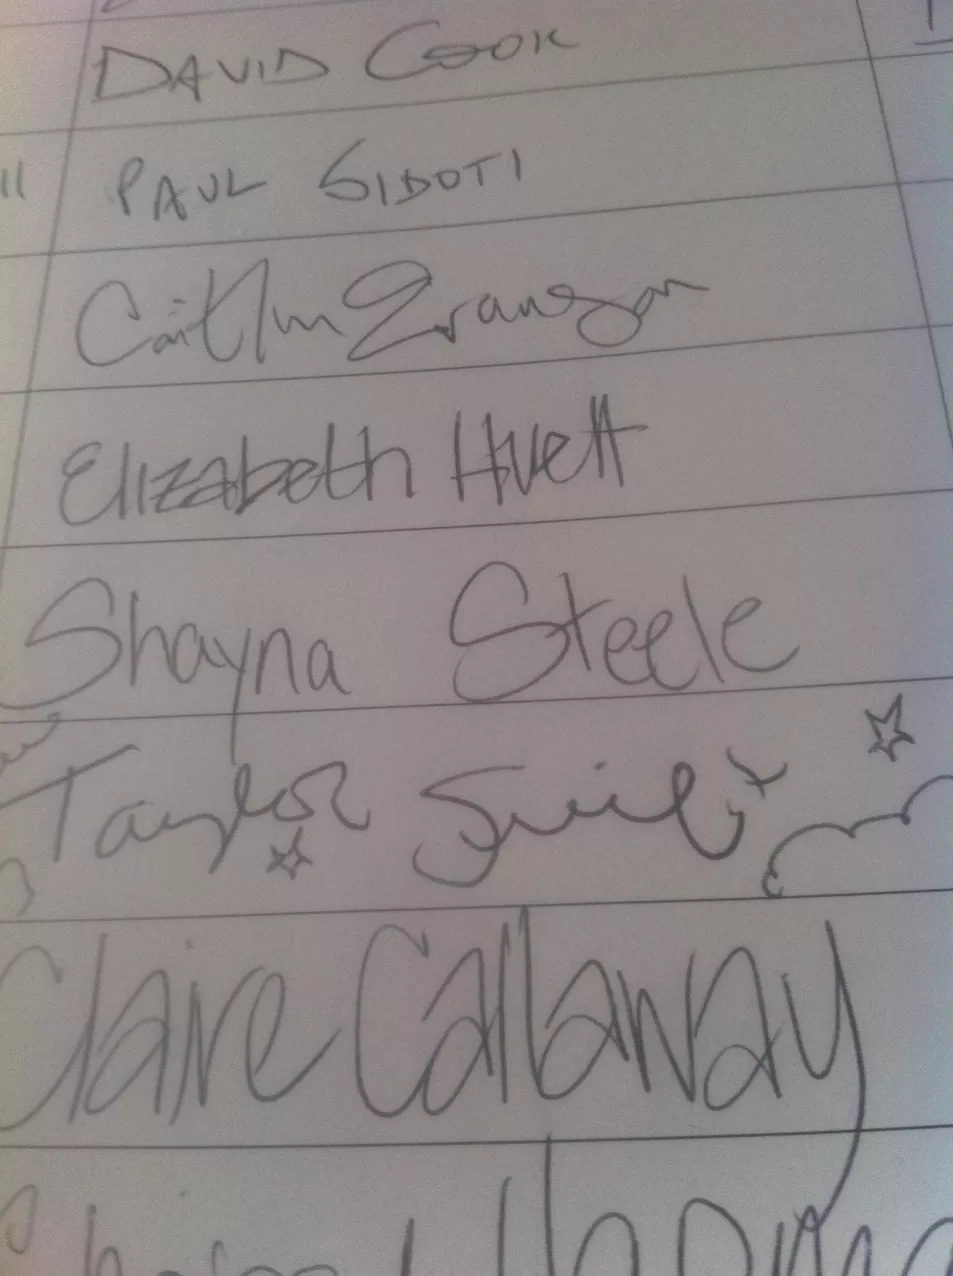 A close-up photo of a guest book signed by Taylor Swift